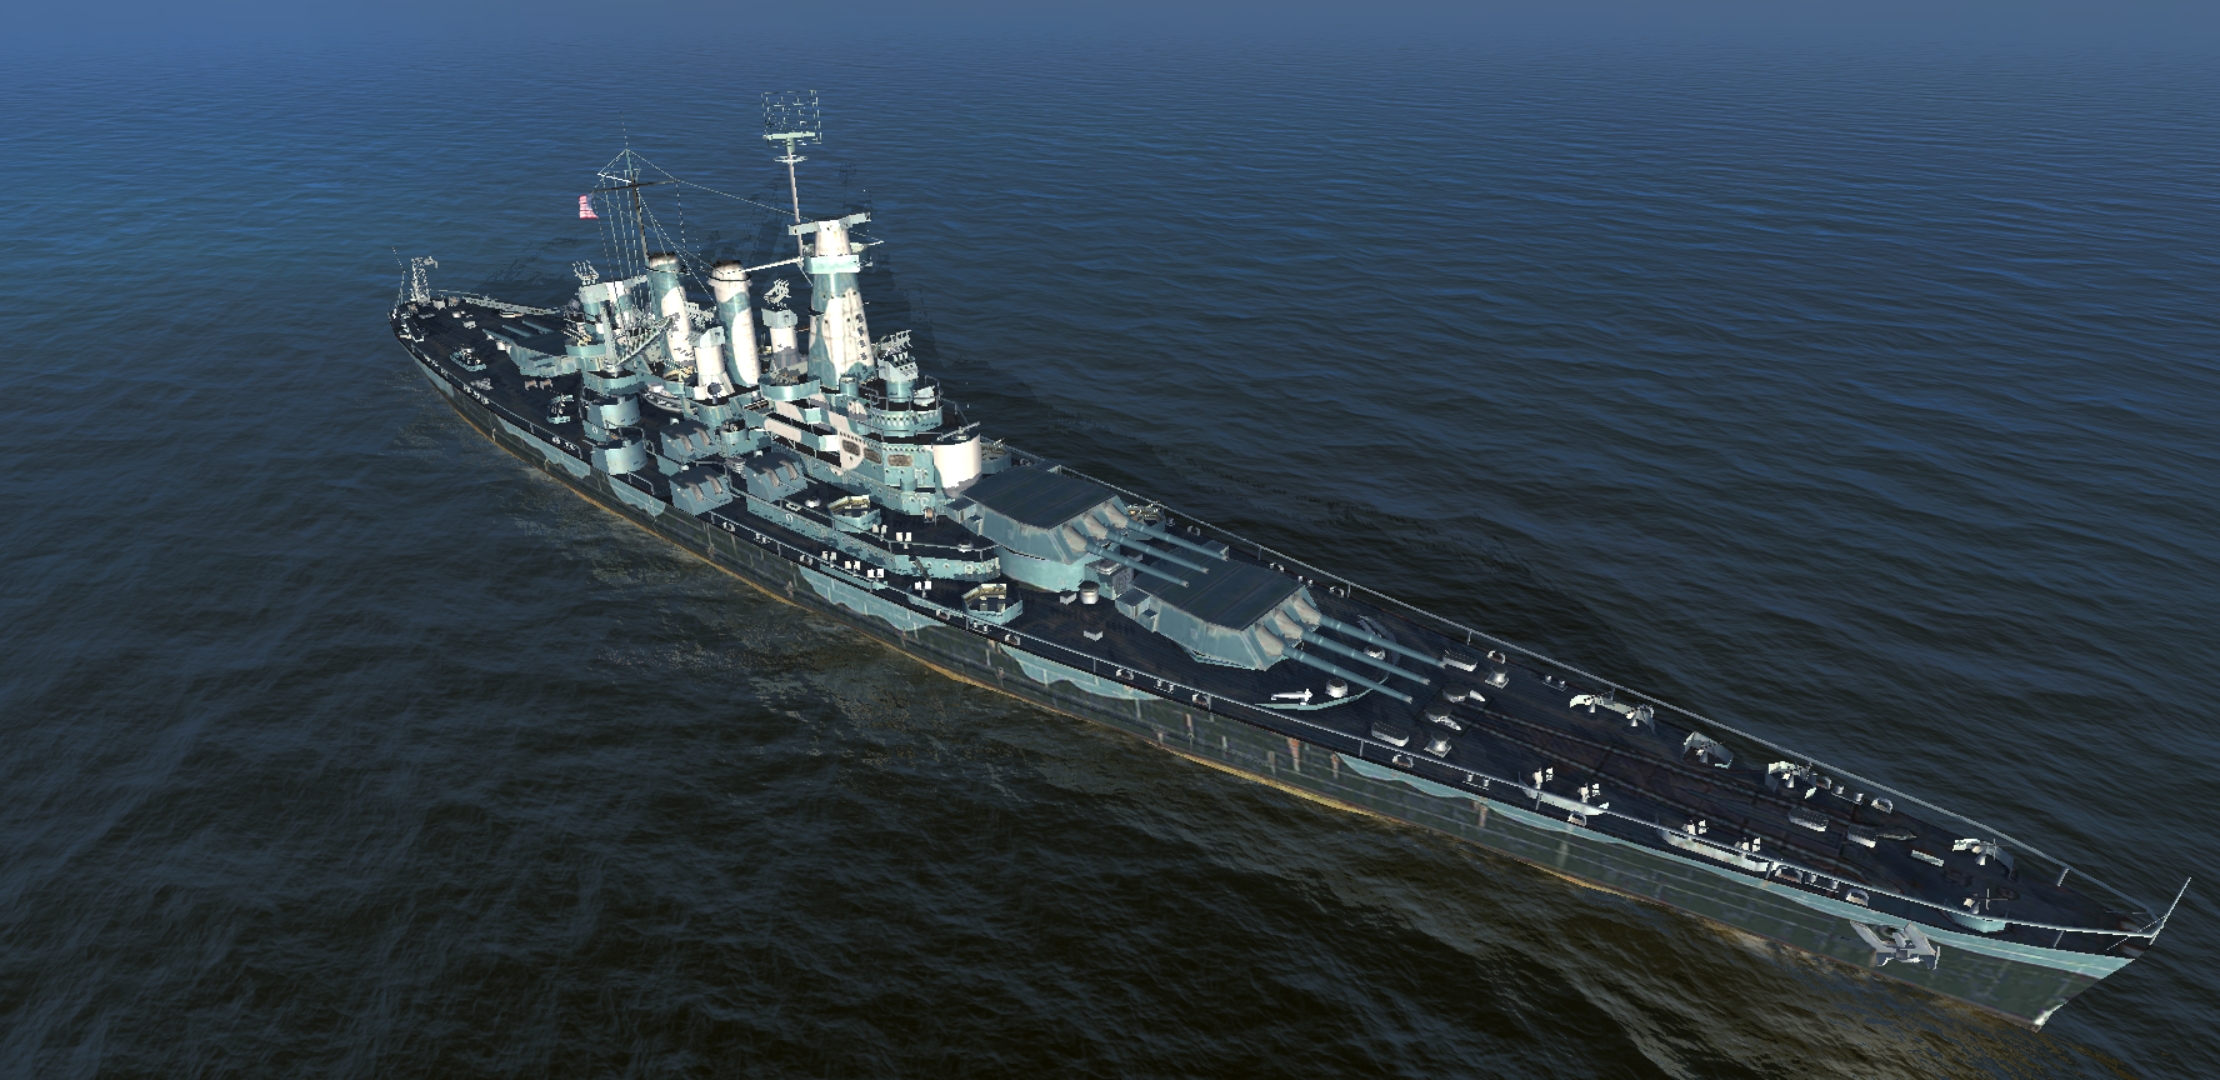 world of warships blitz can